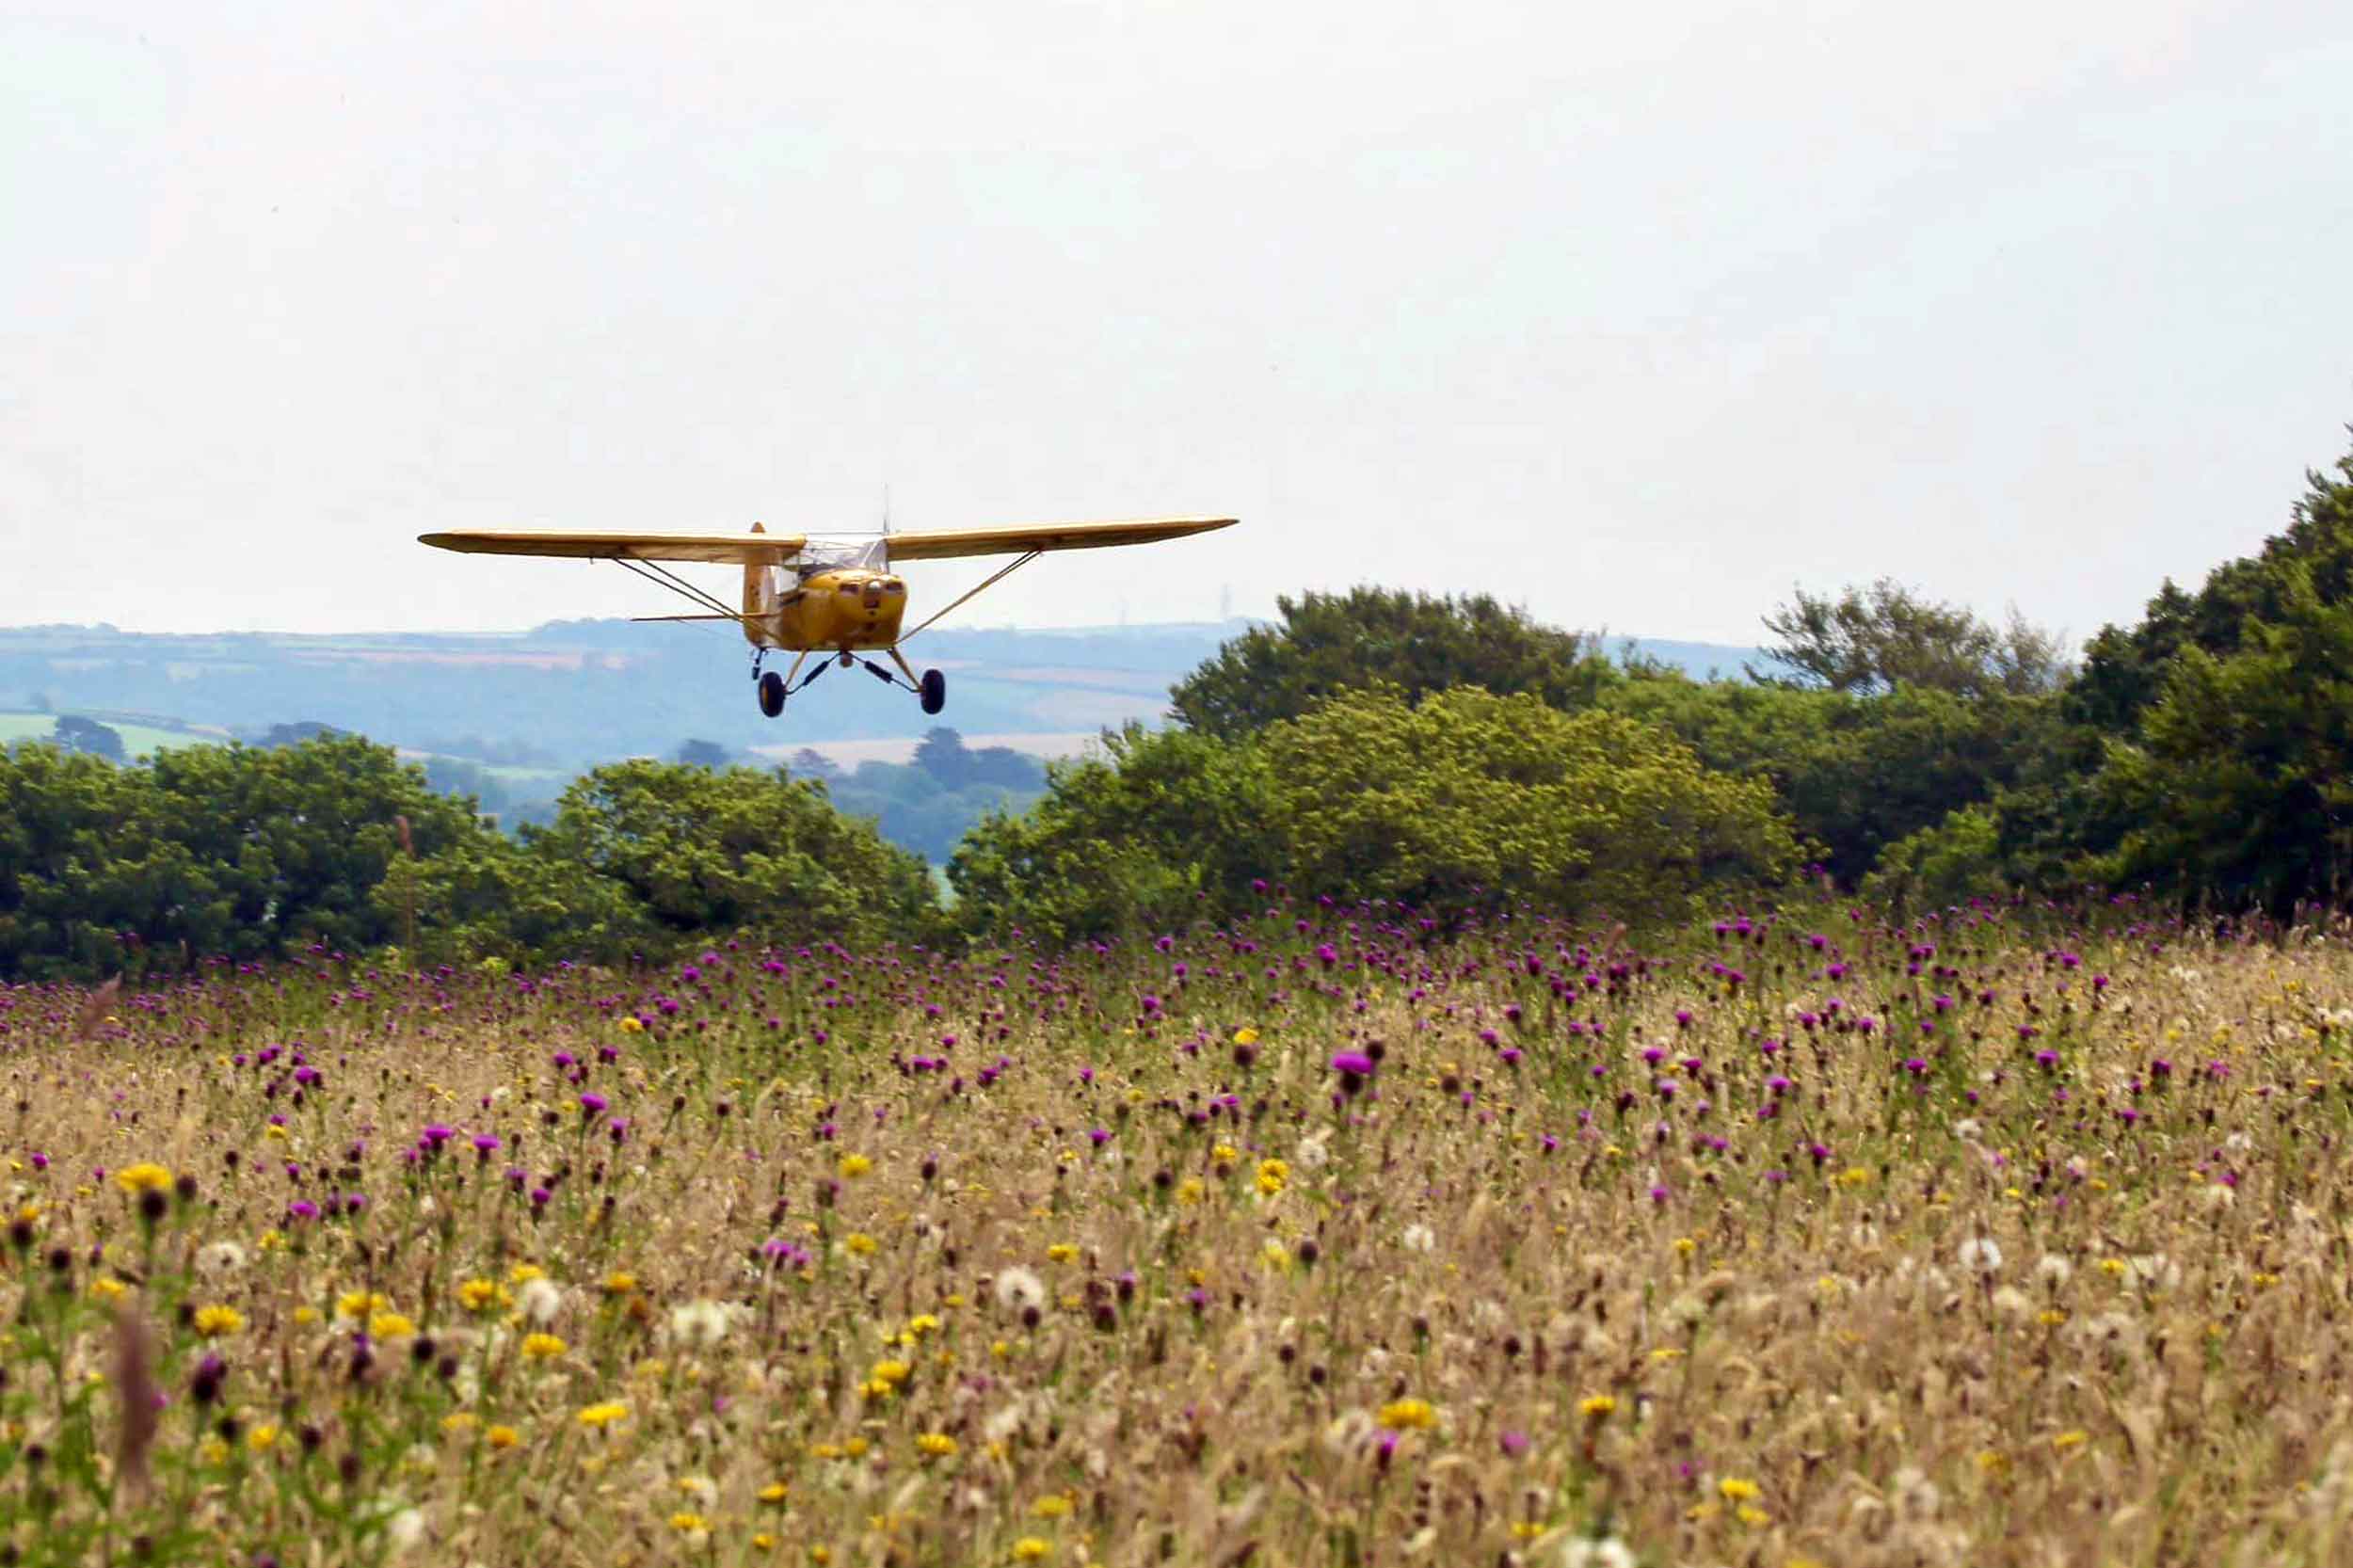 Bodmin Airfield has been recognised as the largest traditional wildlife meadow in the southwest and now has County Wildlife Site status